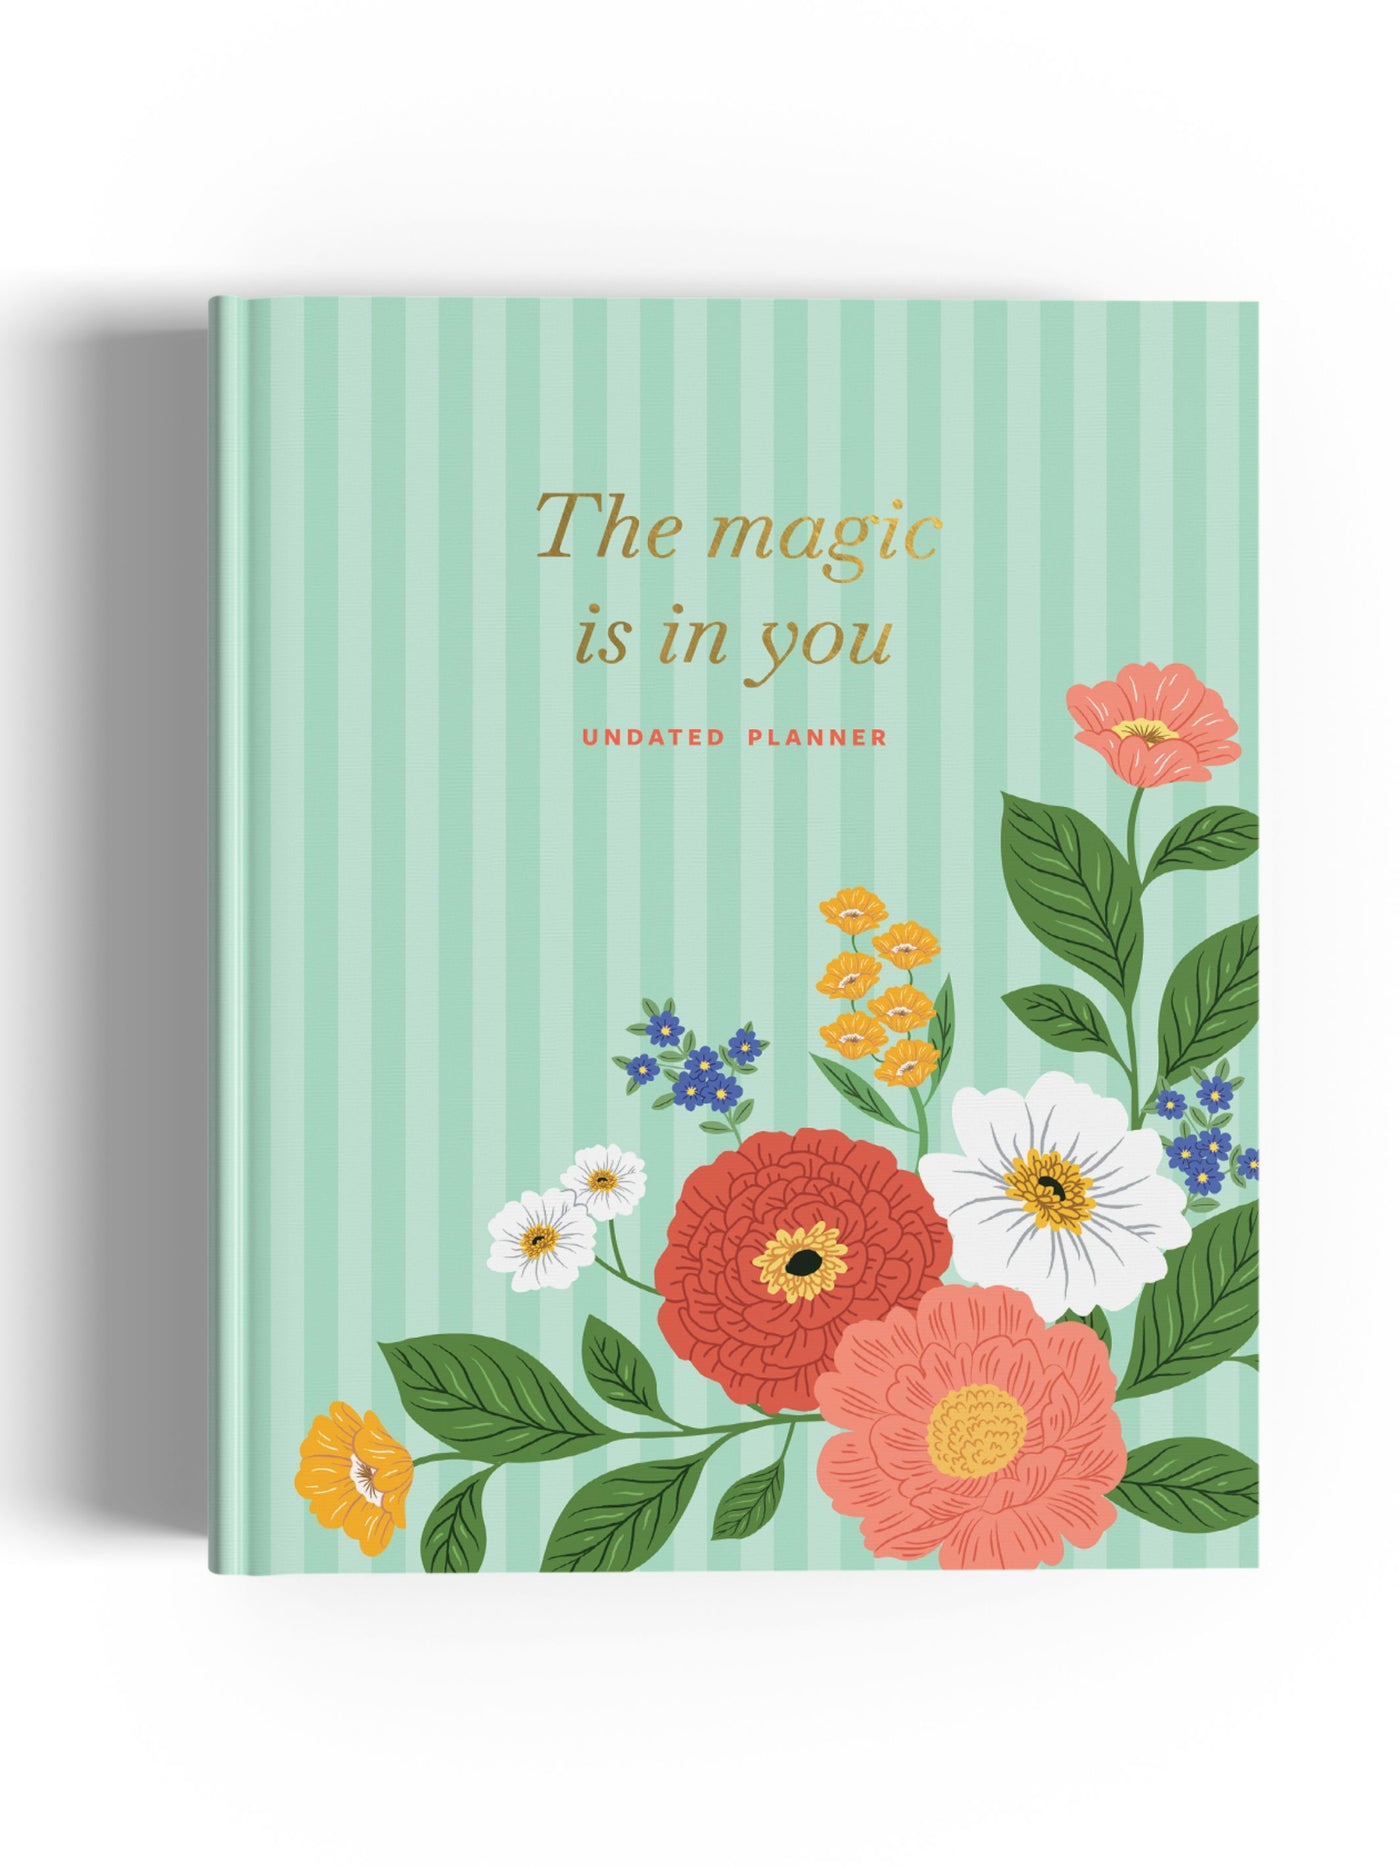 Annual Undated Planner - The Magic Is In You